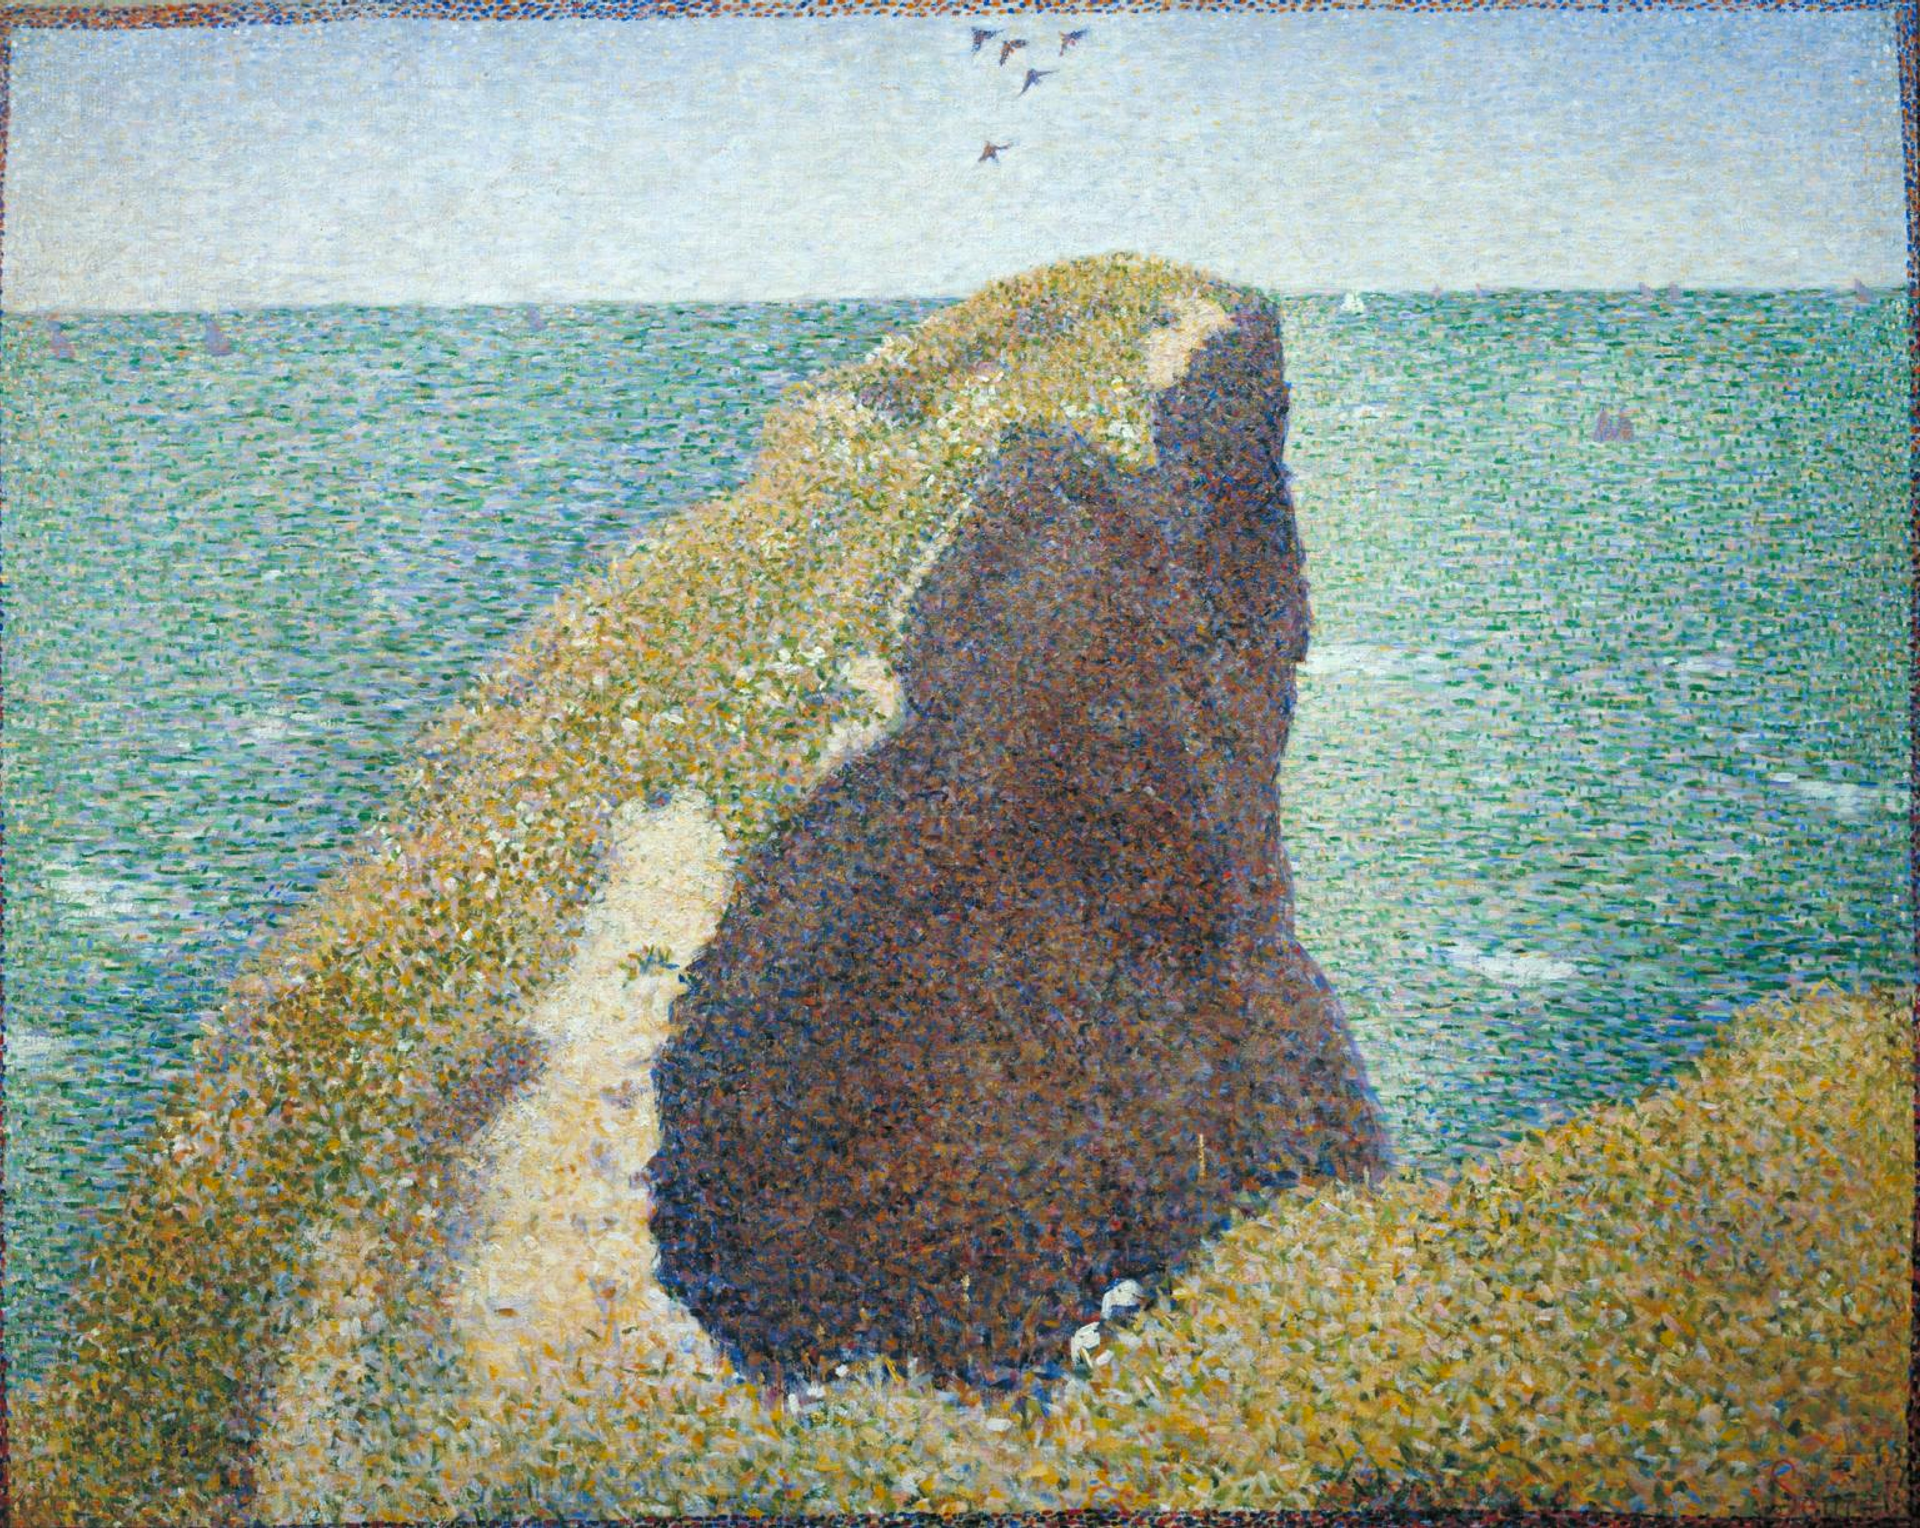 A cliff view over the sea in the Normandy coast by Georges Seurat. The larger composition is made out of smaller, variously colourful dots.